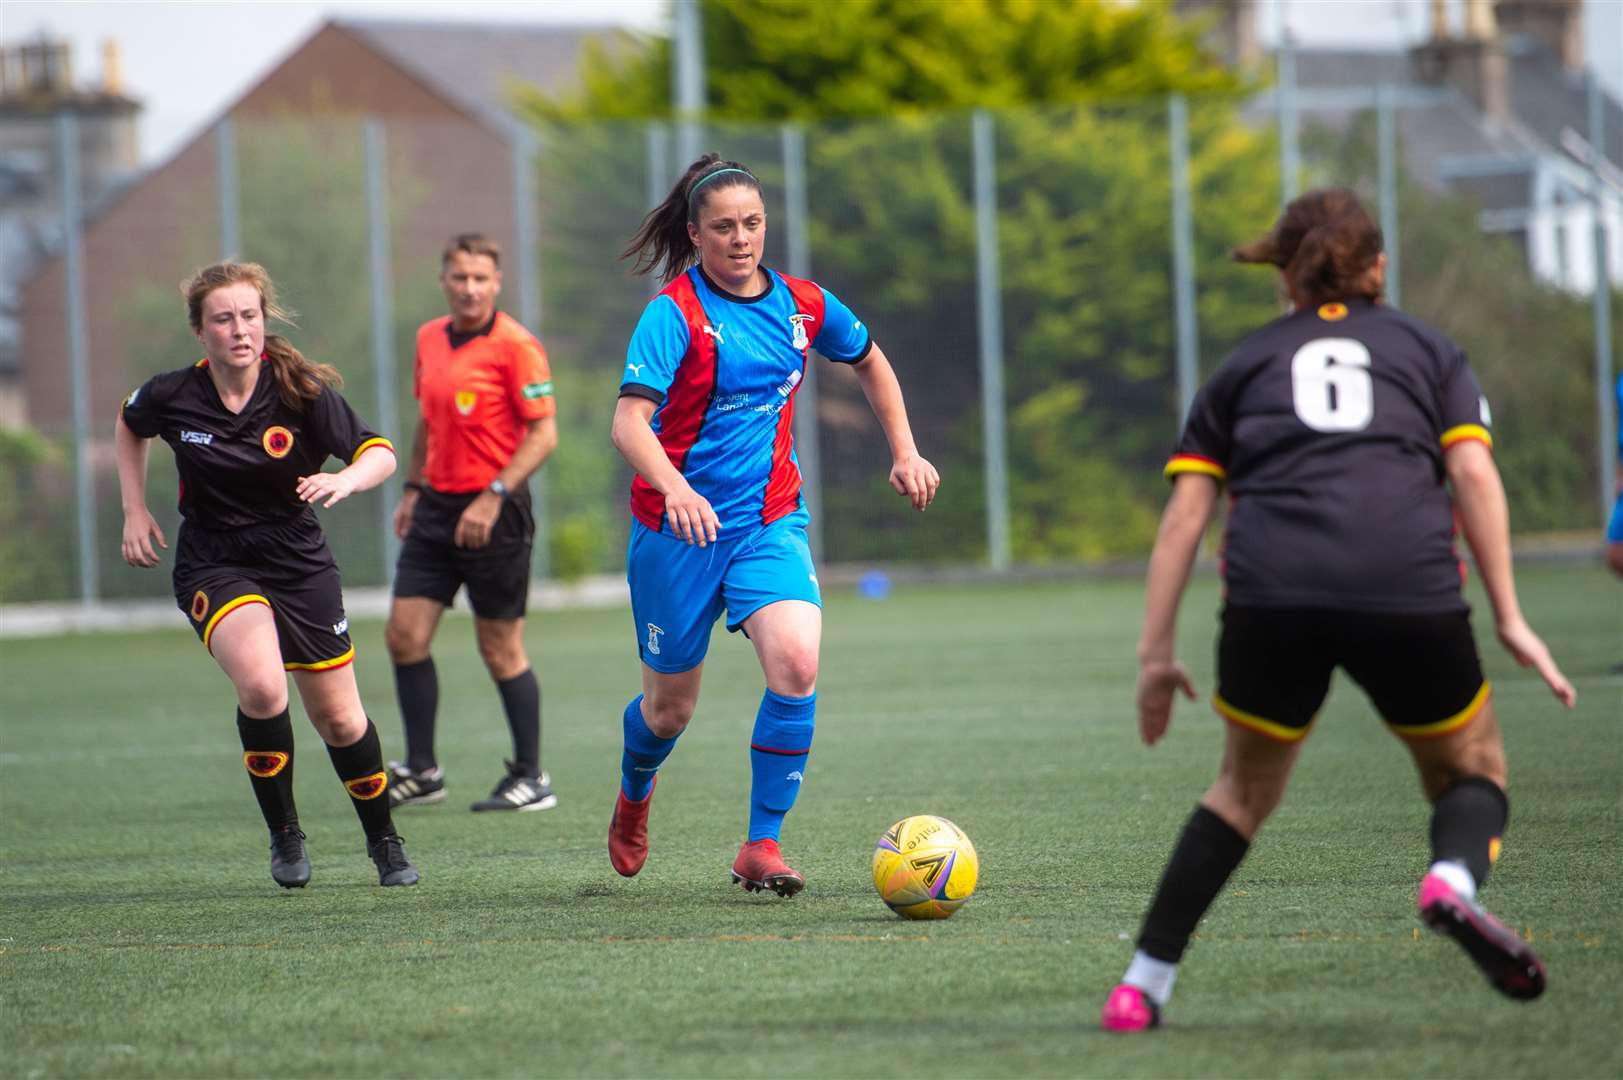 Megan McCarthy impressed in her first game for Caley Thistle in over a year. Picture: Callum Mackay